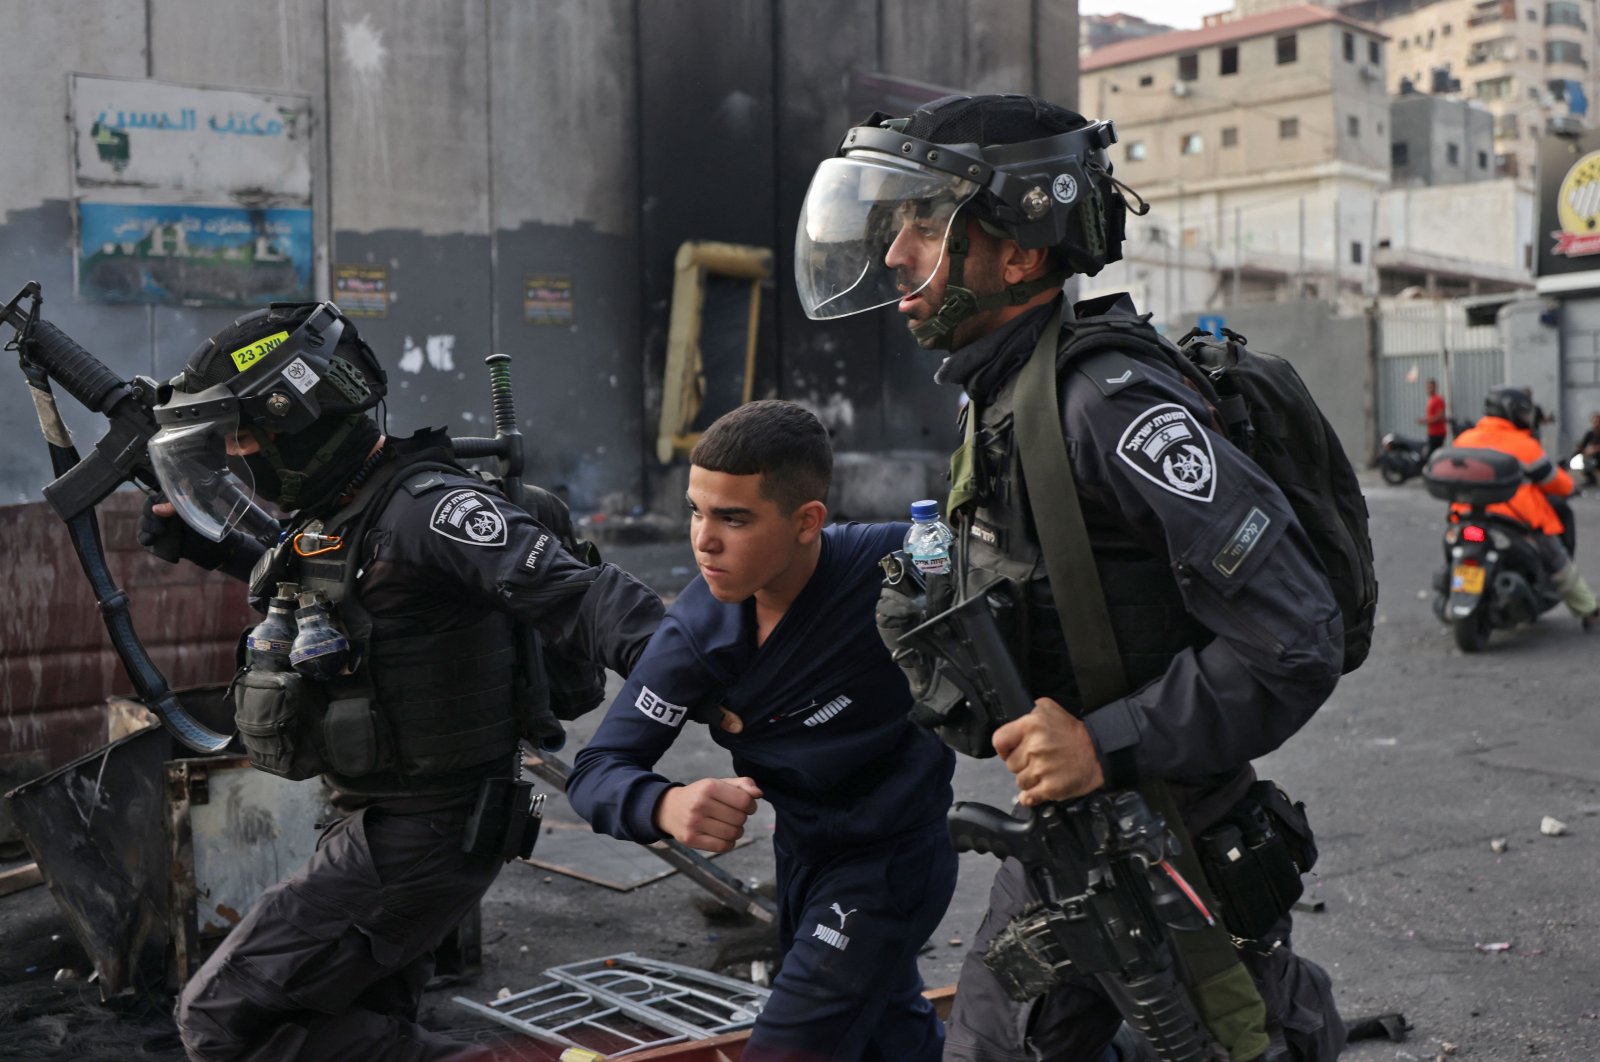 Members of the Israeli security forces arrest a young Palestinian protester during confrontations in the Shuafat refugee camp. Jerusalem, Israel, Oct. 12, 2022. (AFP Photo)